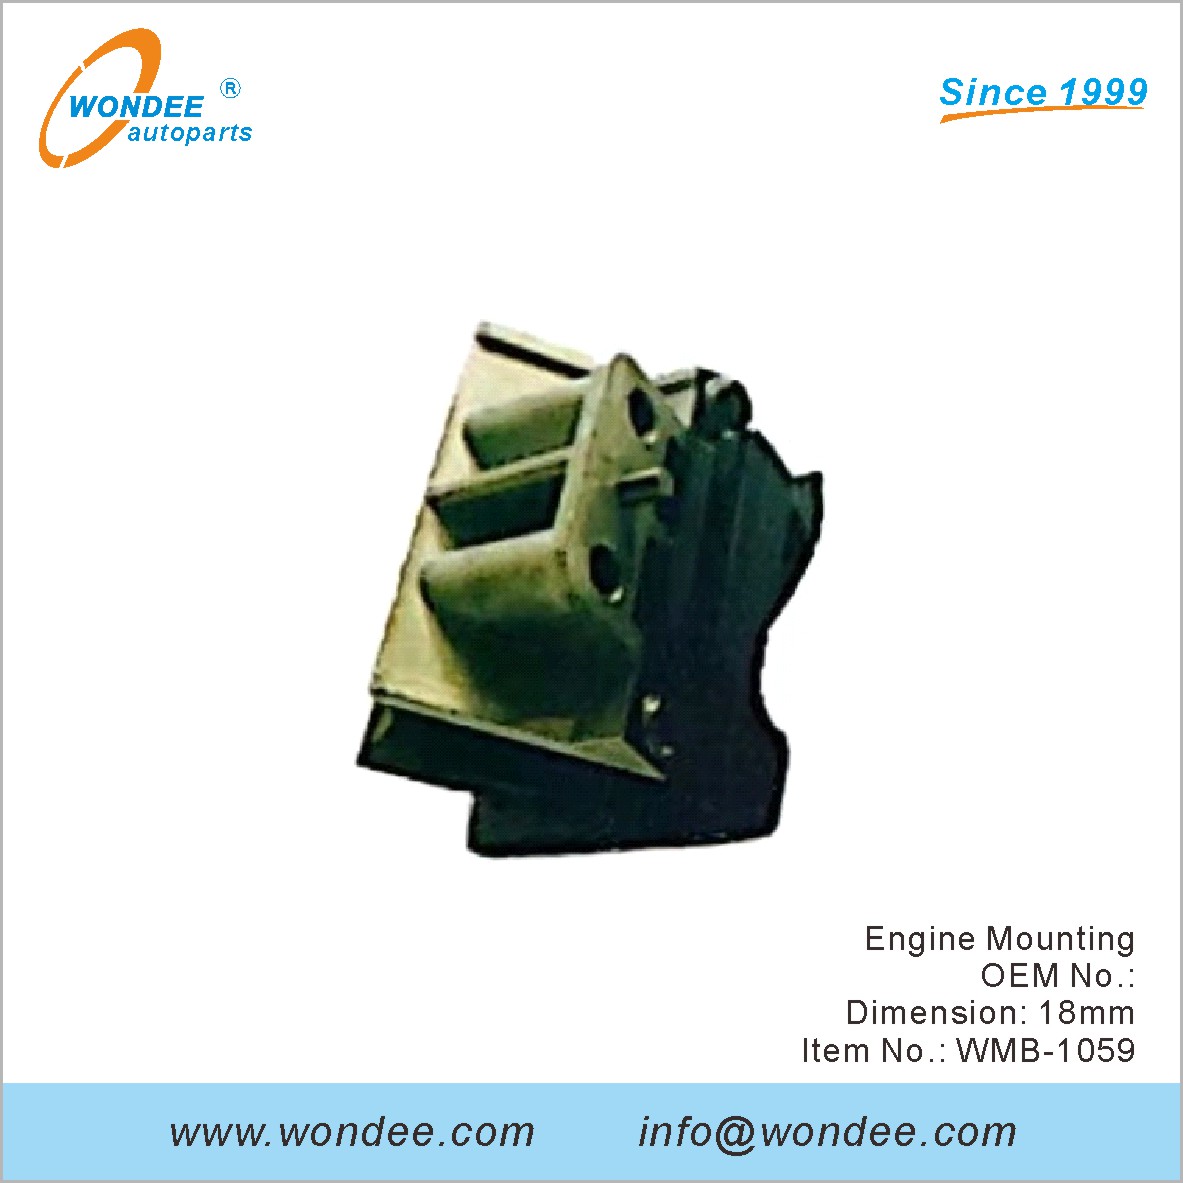 Engine Mounting OEM for Benz from WONDEE